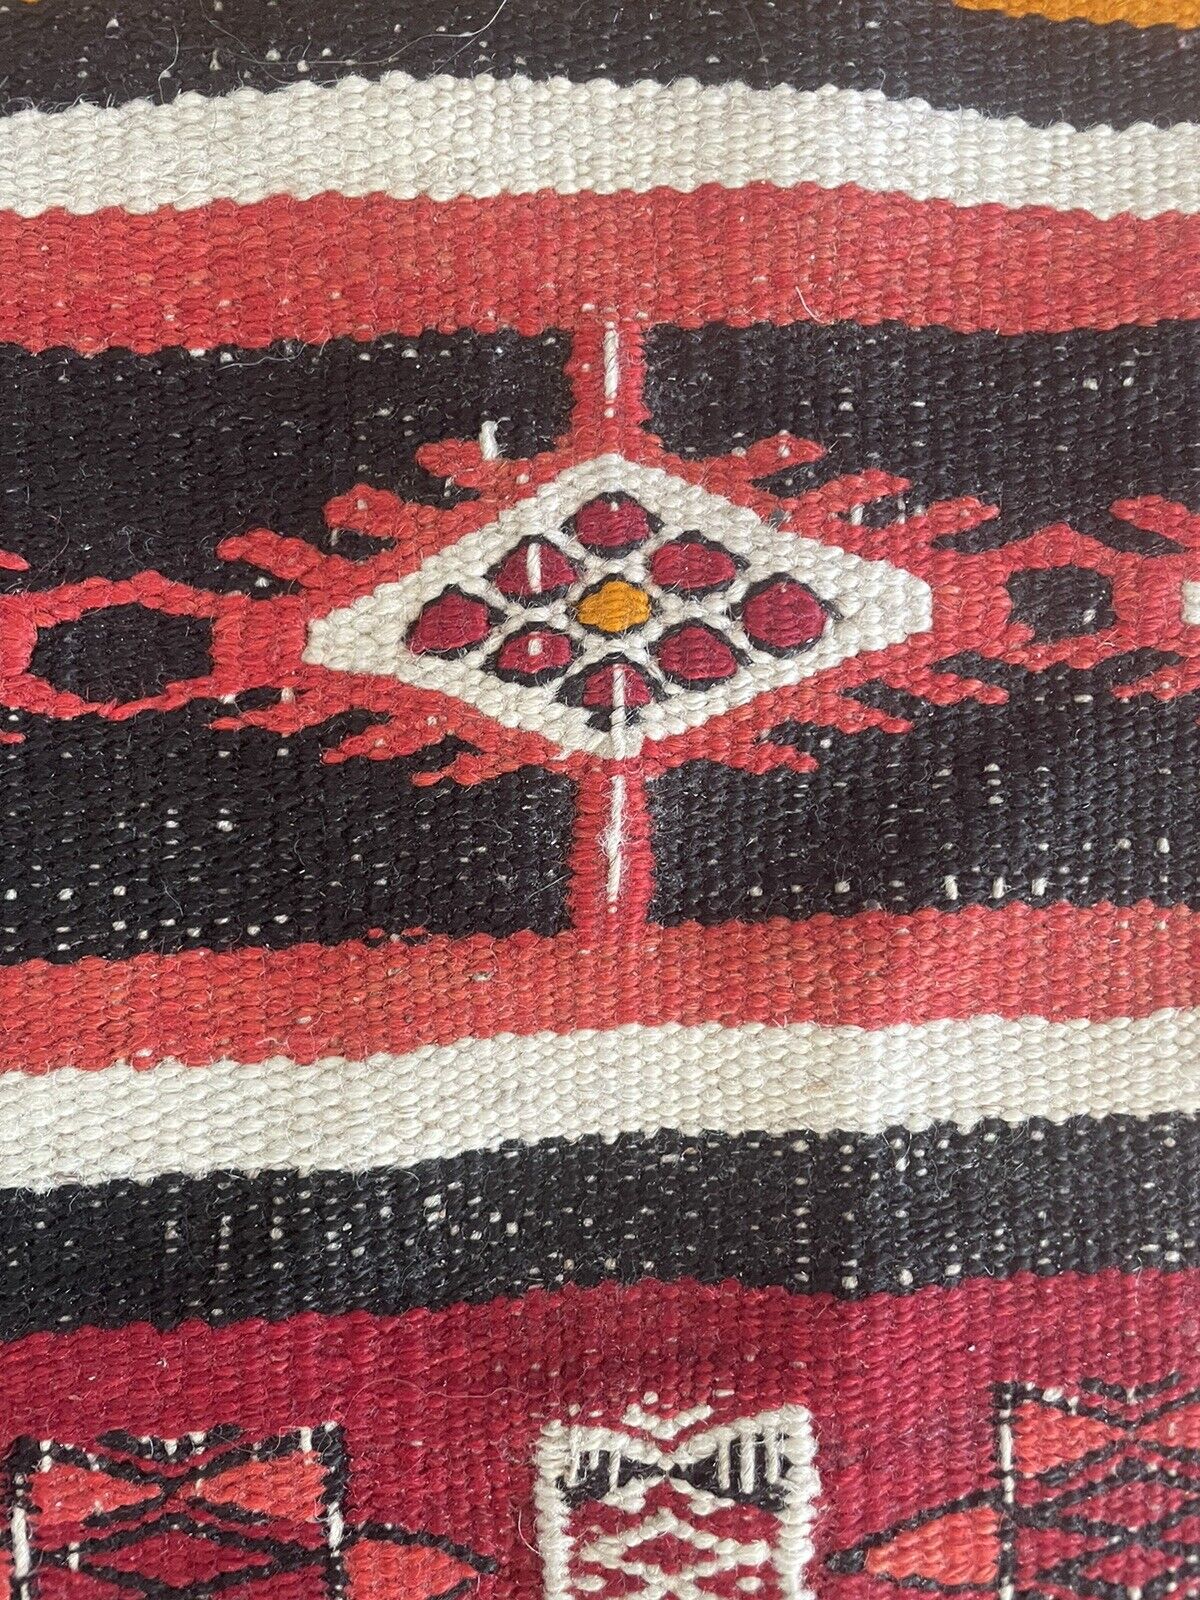 Close-up of fringes on Handmade Antique Moroccan Berber Kilim Rug - Detailed view emphasizing the fringes at the top end of the rug, indicating its handmade nature and cultural authenticity.